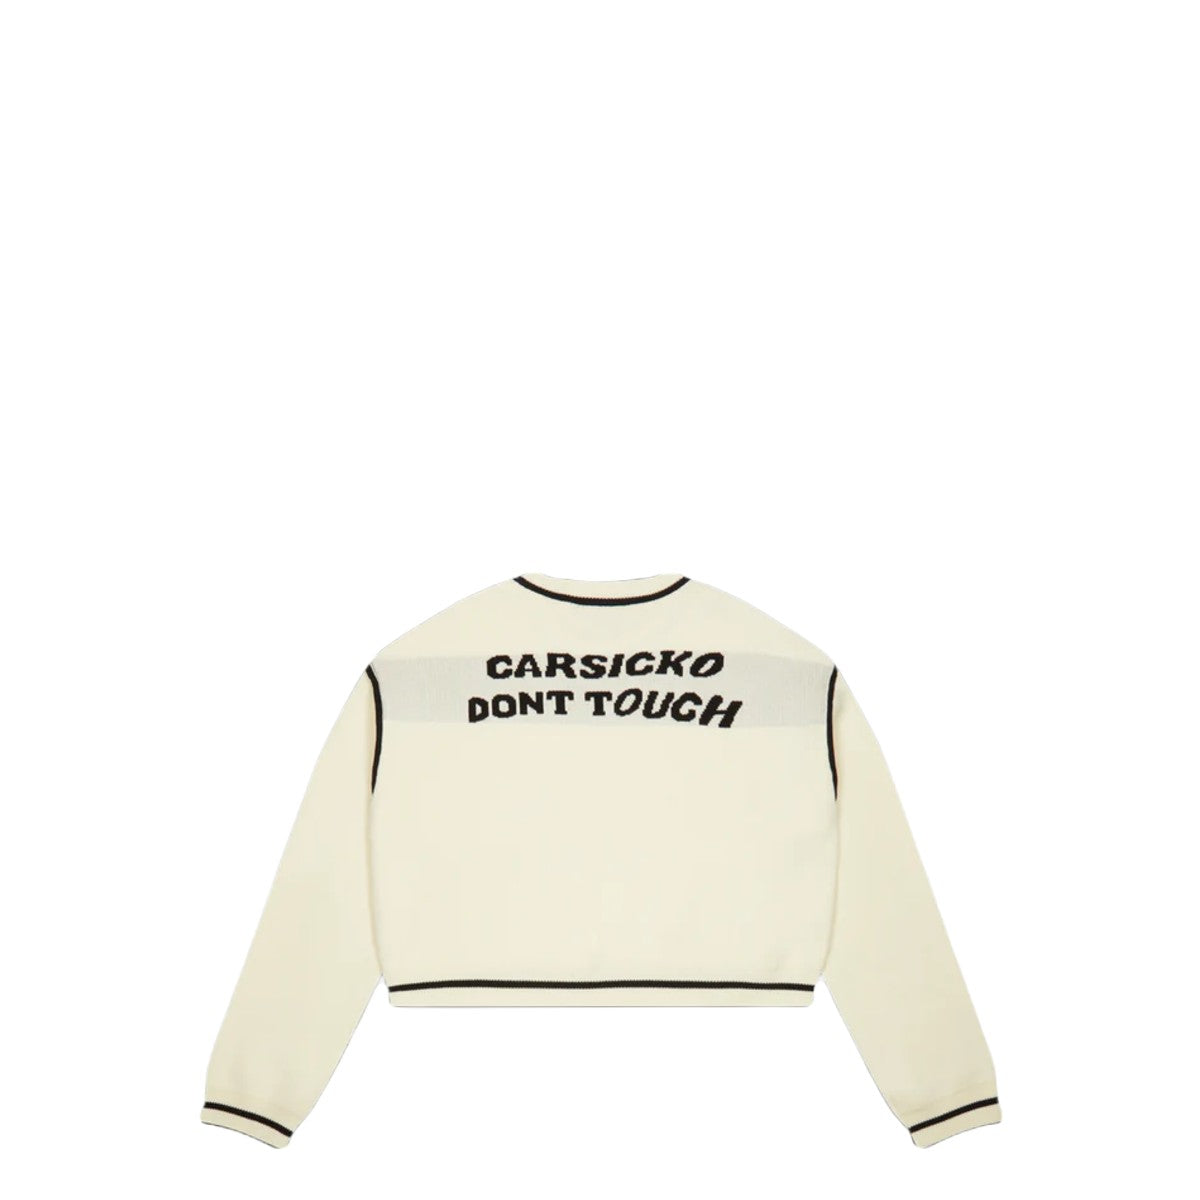 Carsicko Don't Touch Knit Sweater - White